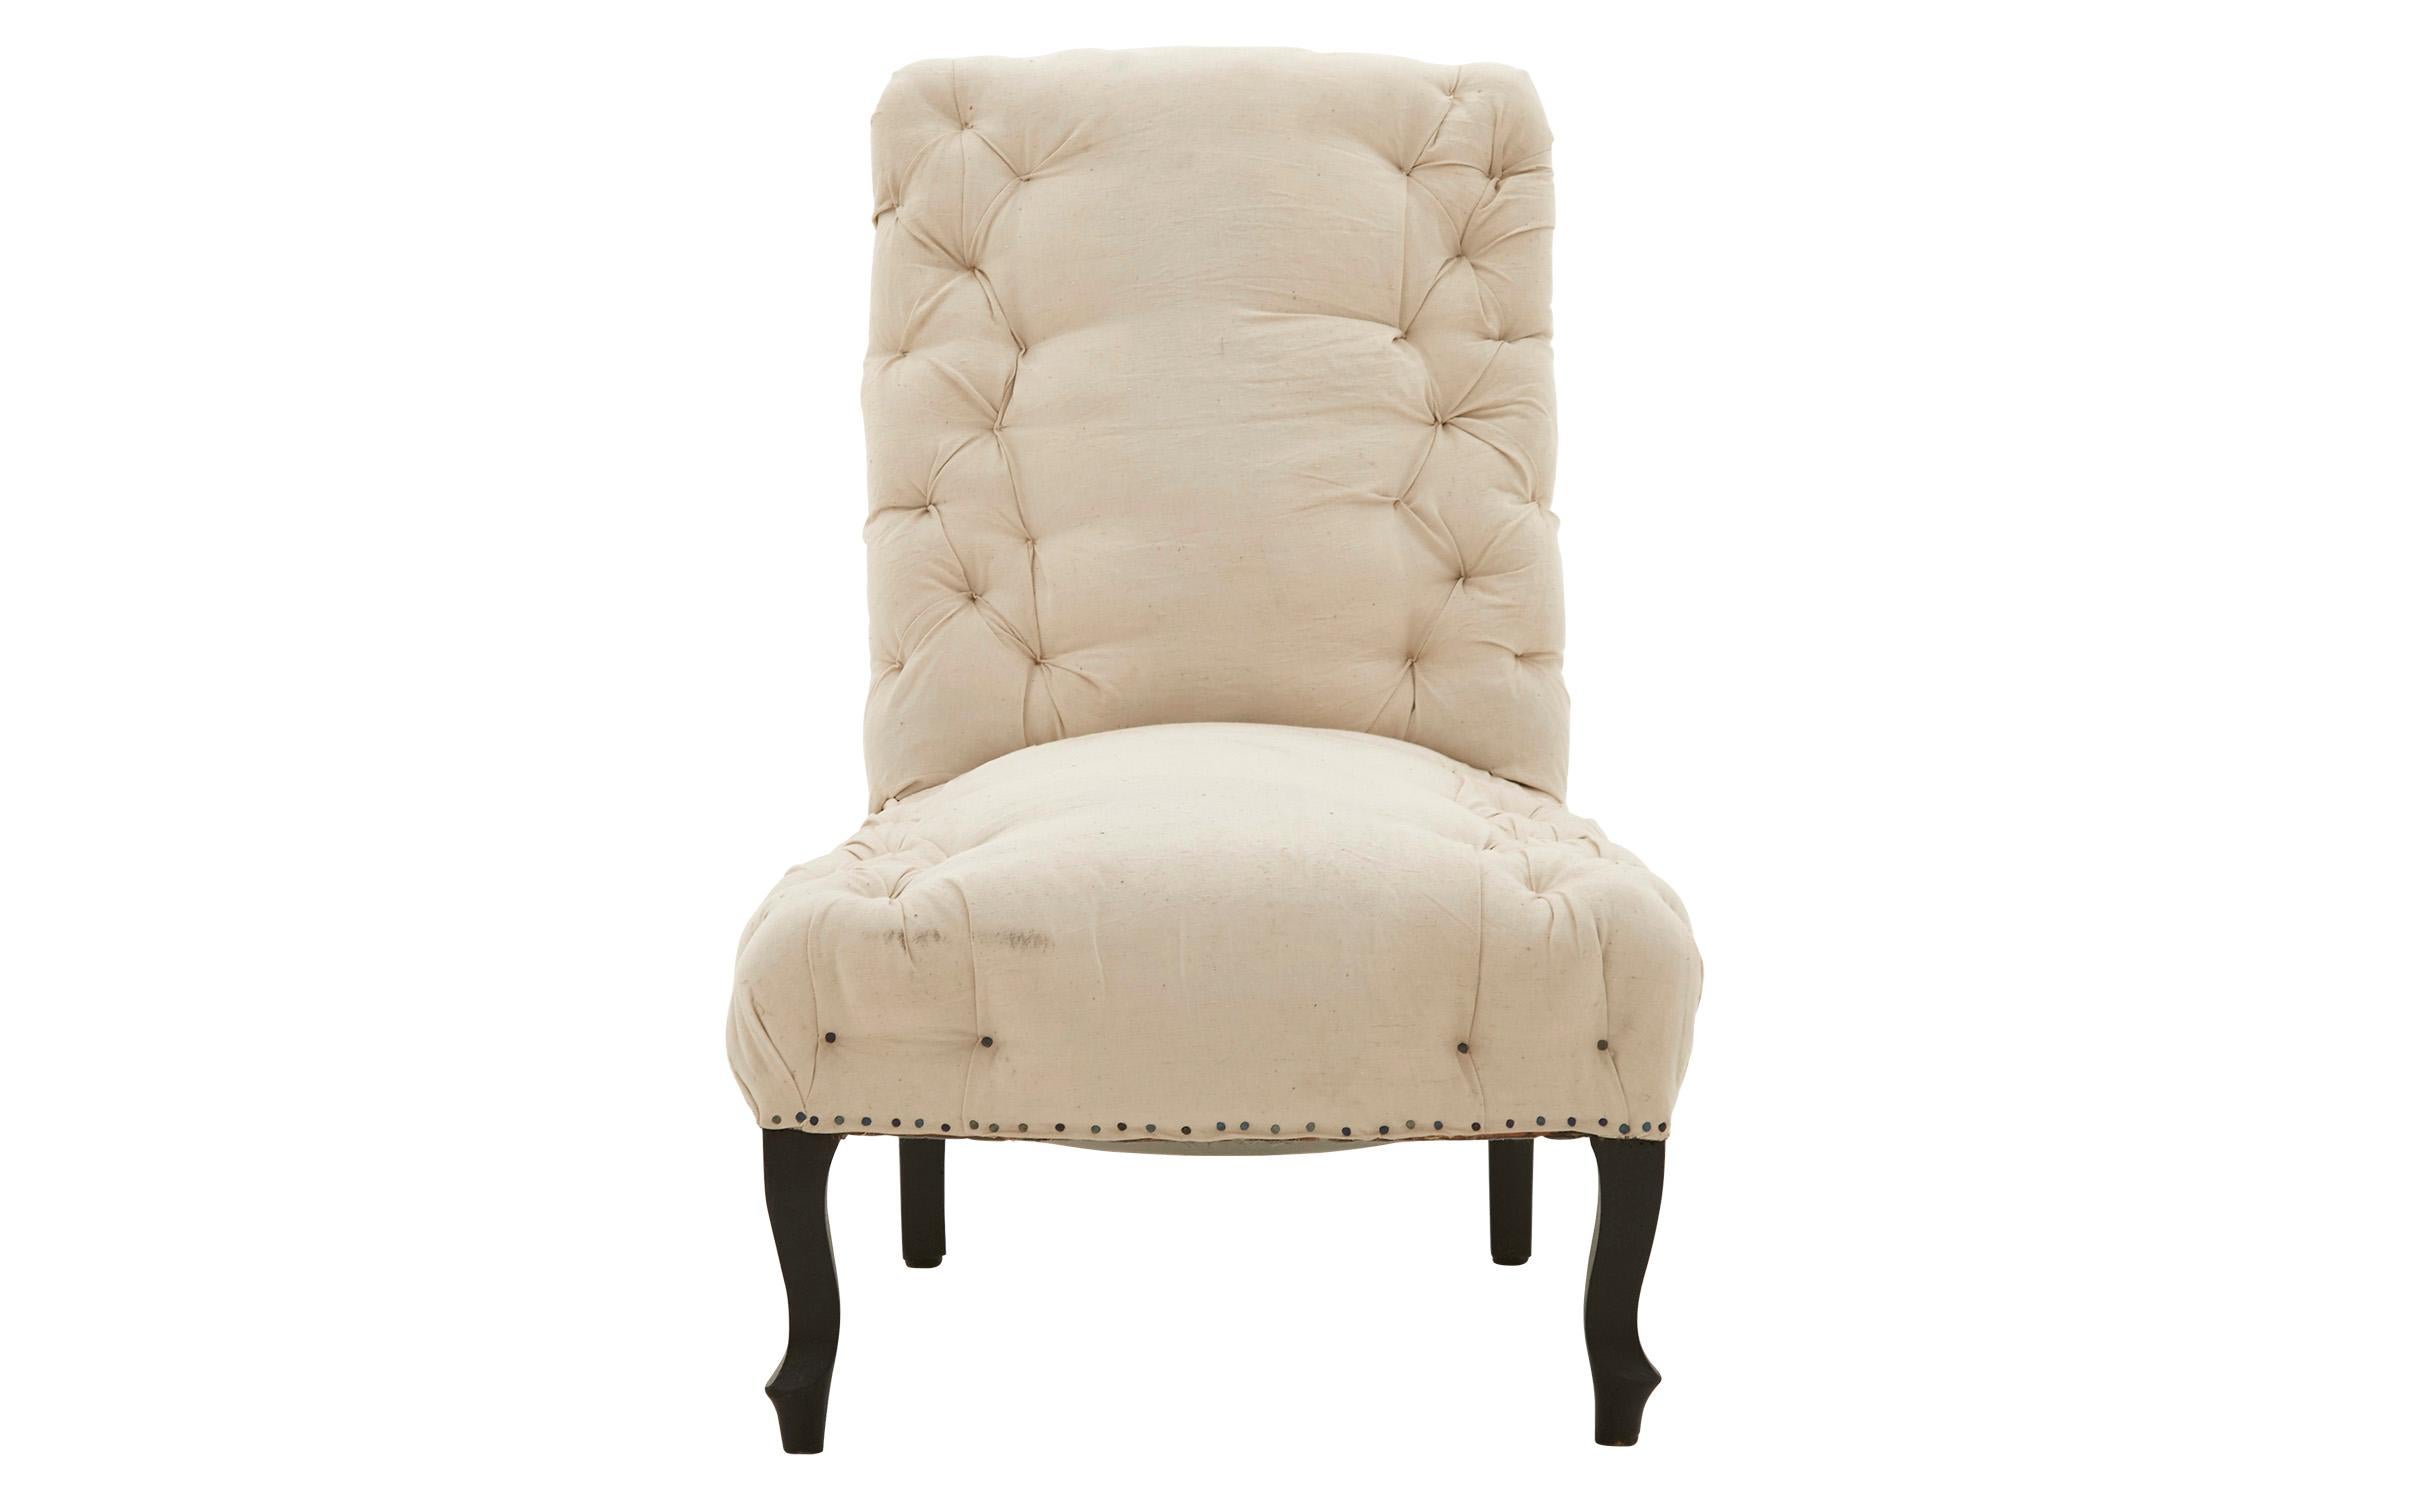 Victorian Unupholstered Muslin and Burlap Tufted Slipper Chair